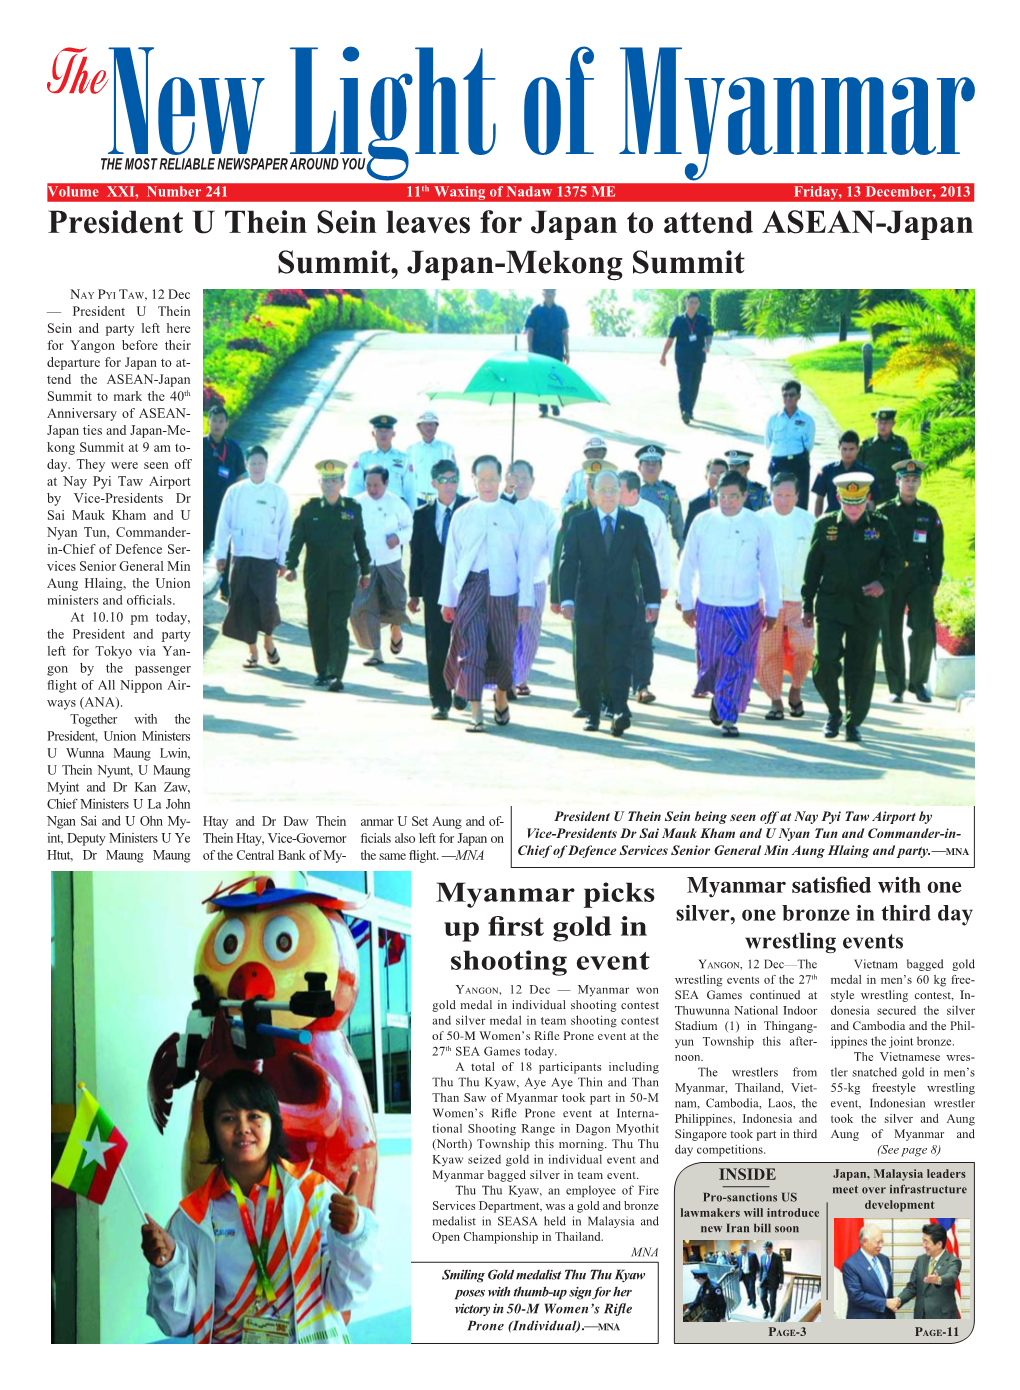 President U Thein Sein Leaves for Japan to Attend ASEAN-Japan